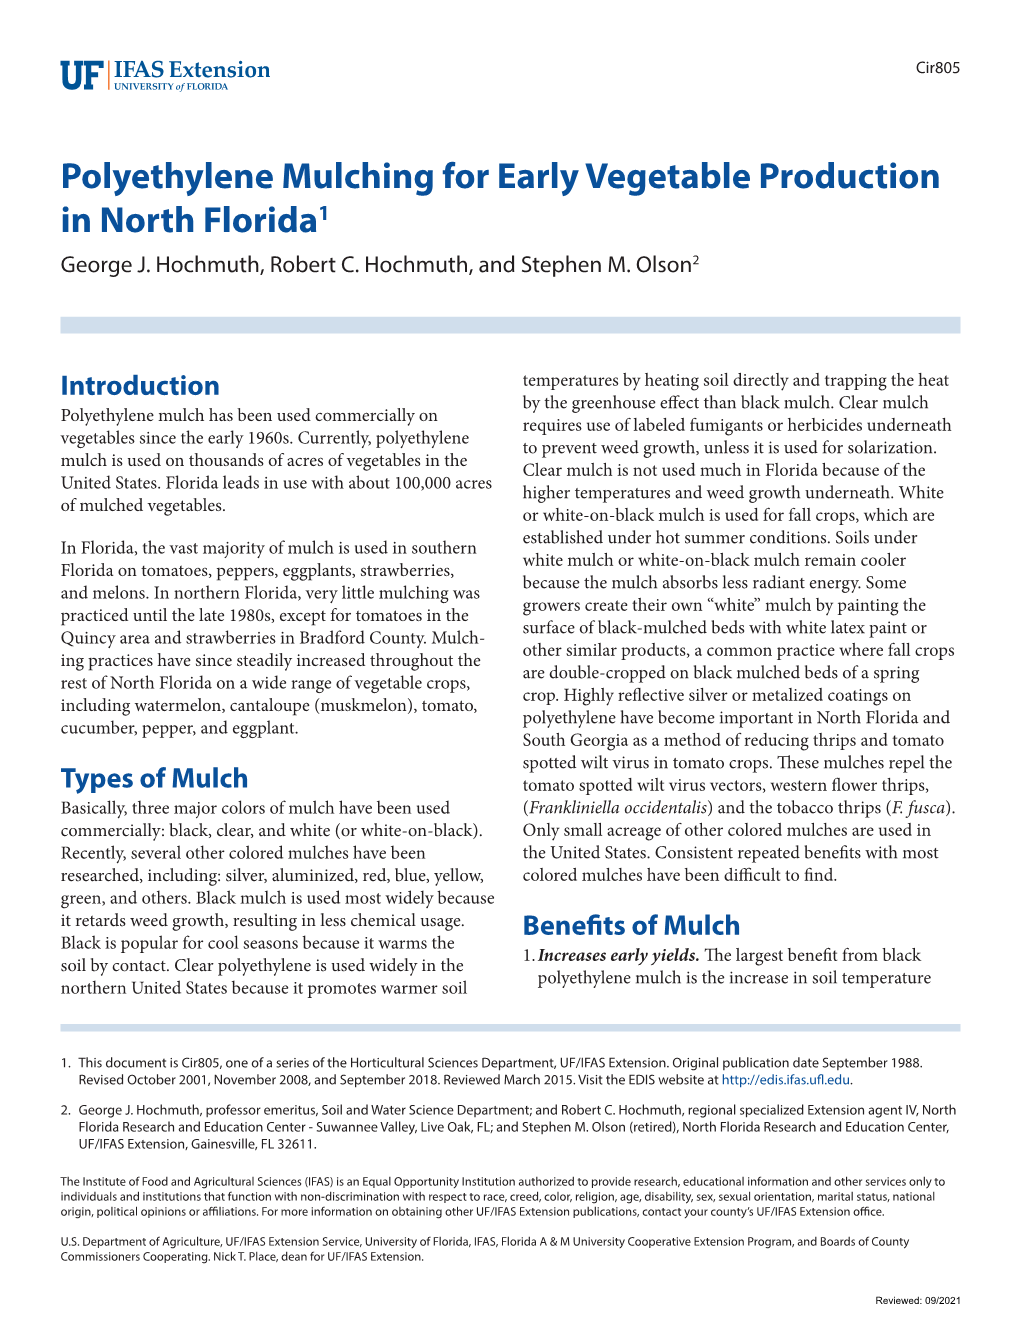 Polyethylene Mulching for Early Vegetable Production in North Florida1 George J